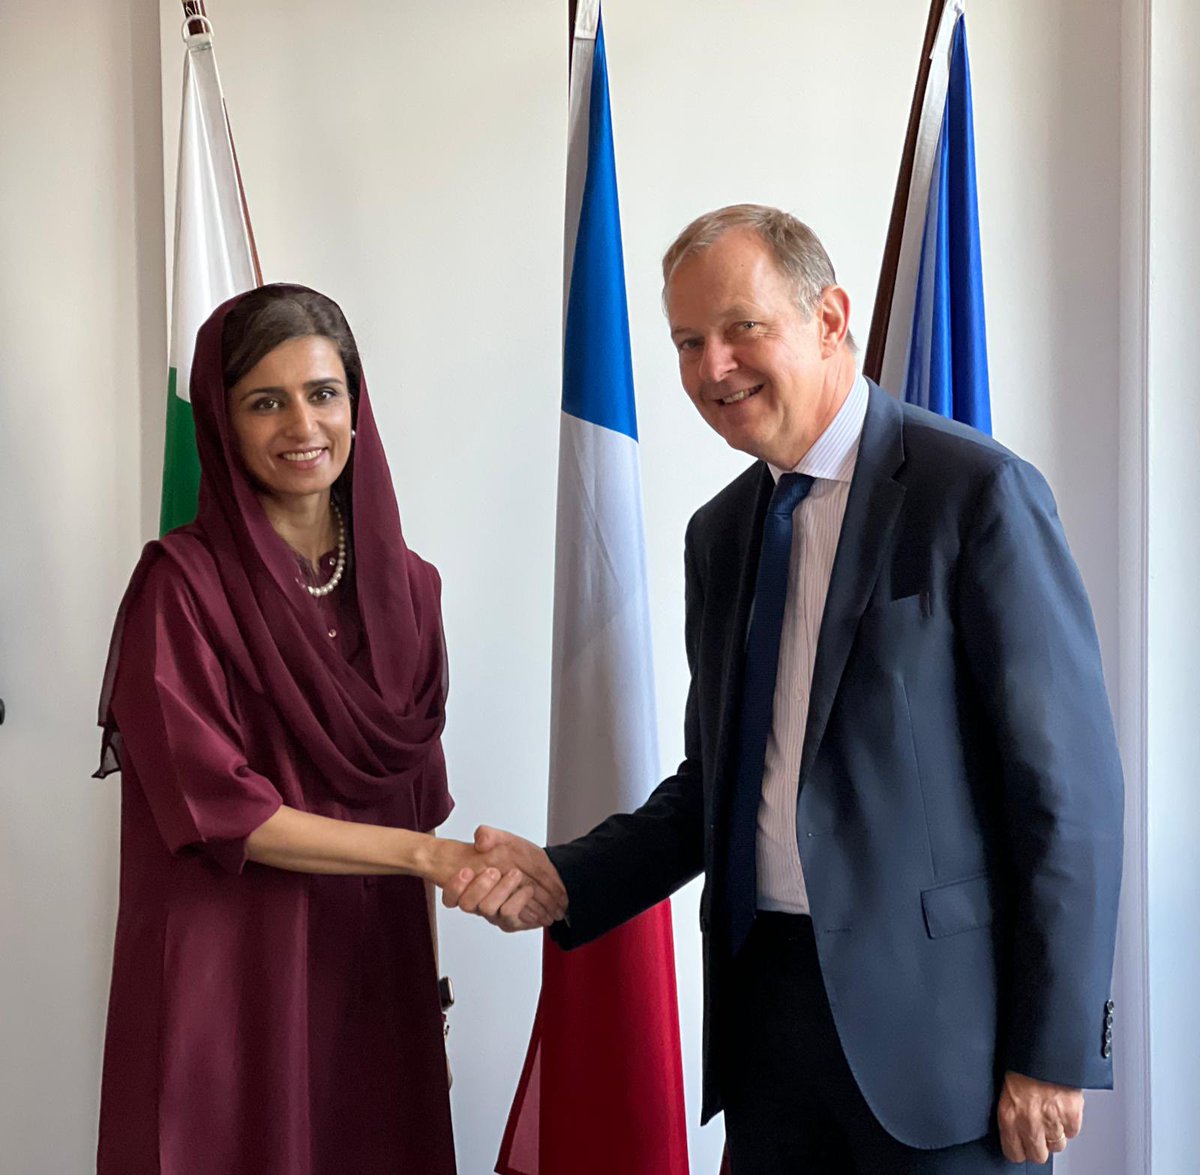 MoS @HinaRKhar met Mr. Thierry Pflimlin, President France-Pakistan Business Council at MEDEF International, who is also CEO TOTAL Global Services. Trade and commerce relations between the two countries as well as investment opportunities in Pakistan were discussed.